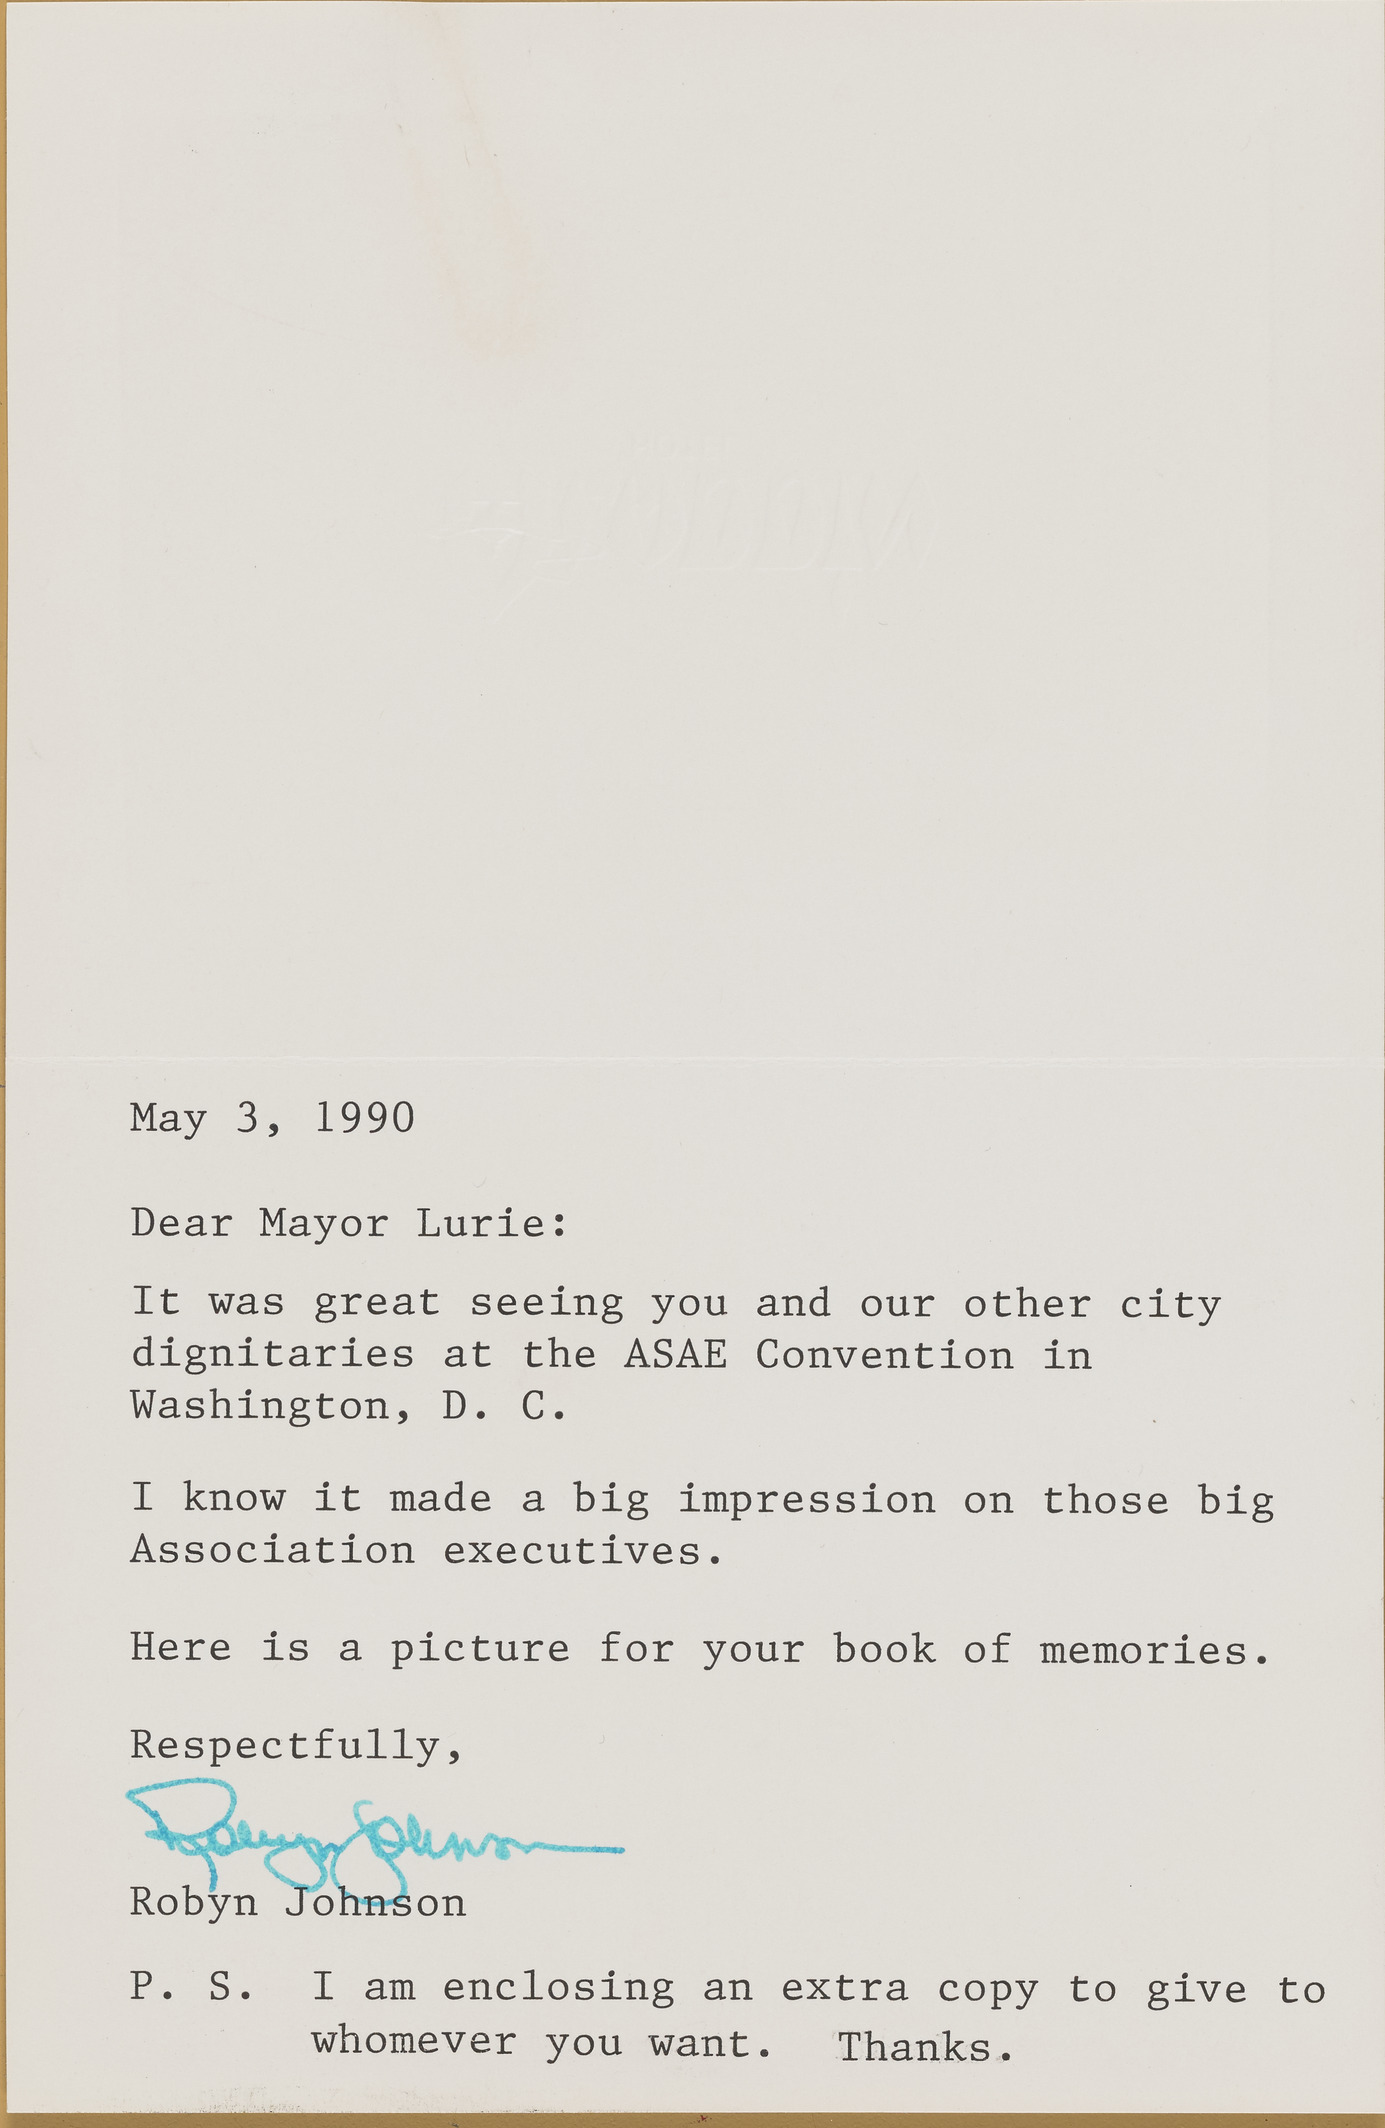 Letter from Robyn Johnson to Mayor Lurie, May 3, 1990 for ASAE Convention